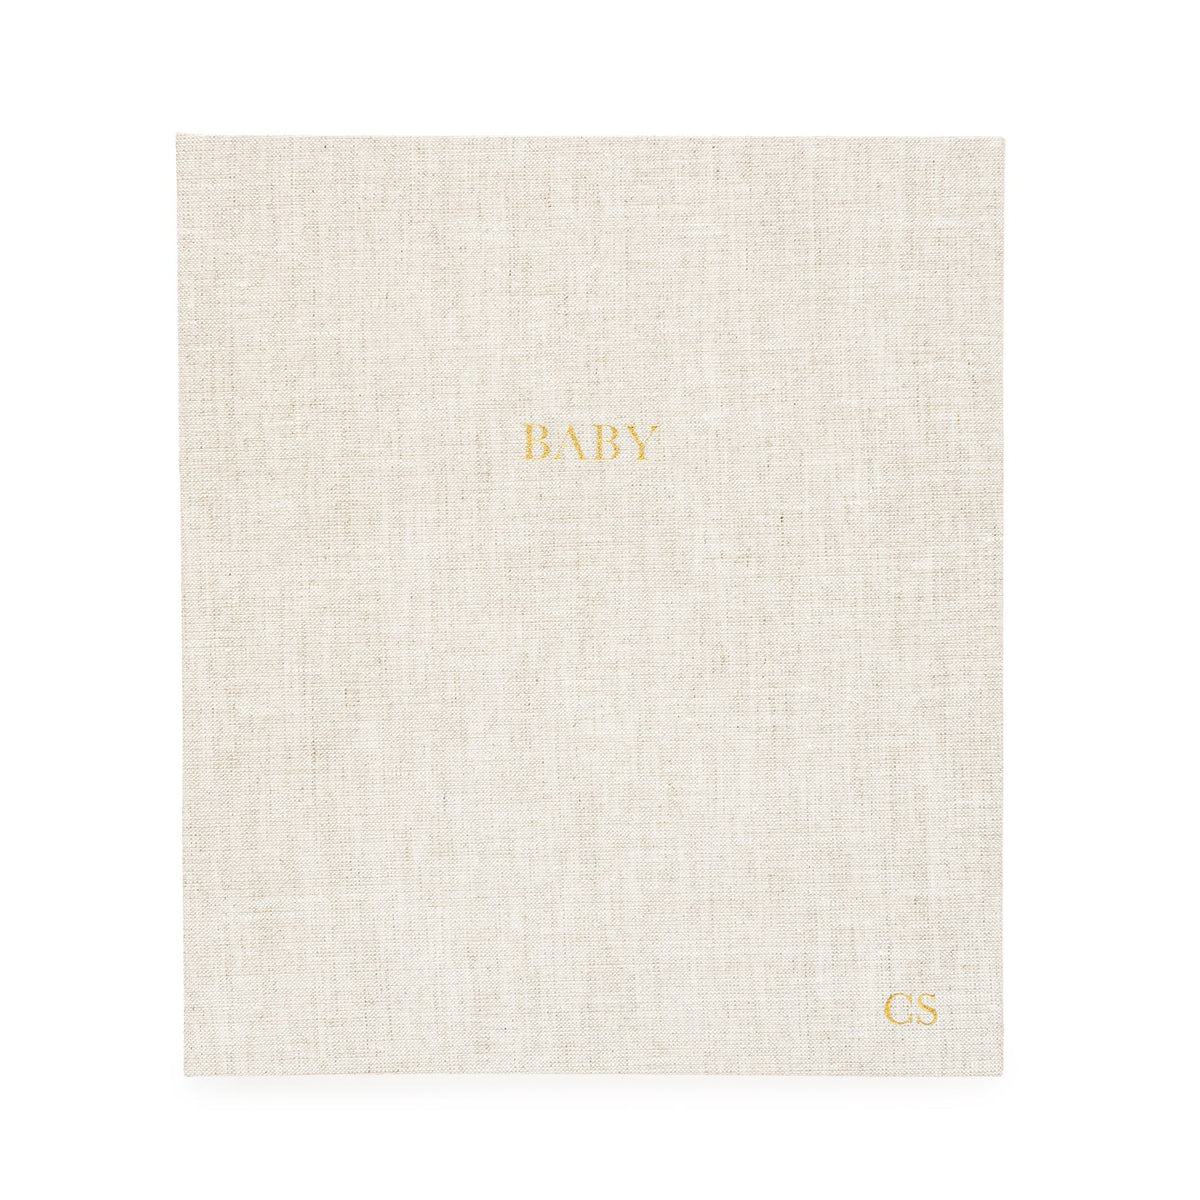 This is the cover of our baby book in a flax linen color. #color_flax